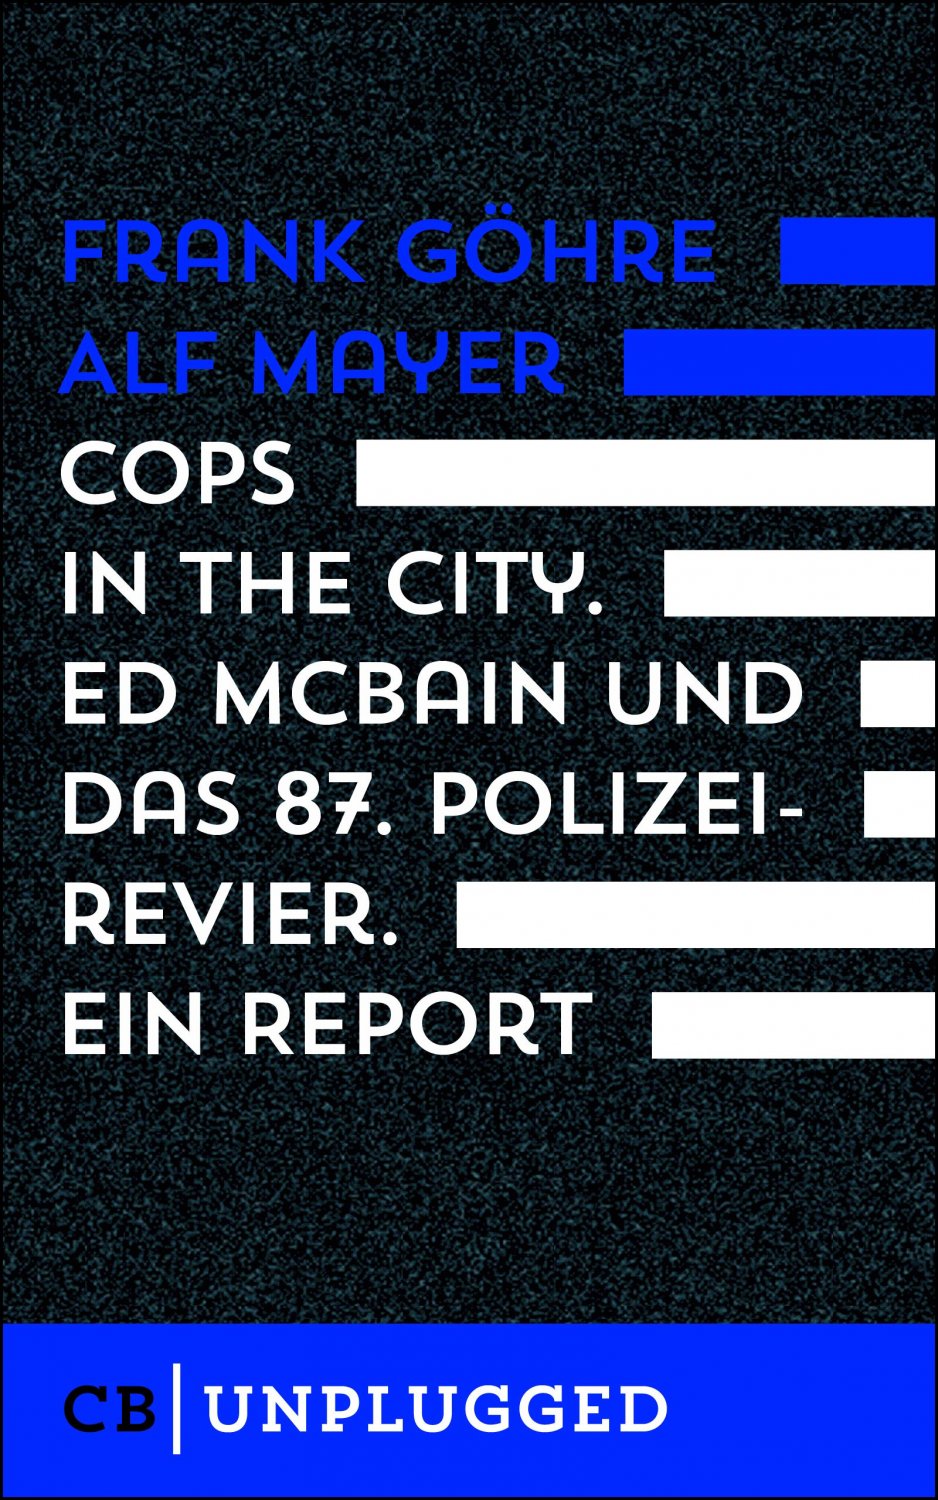 Göhre_Mayer_Cops_Cover_unplugged